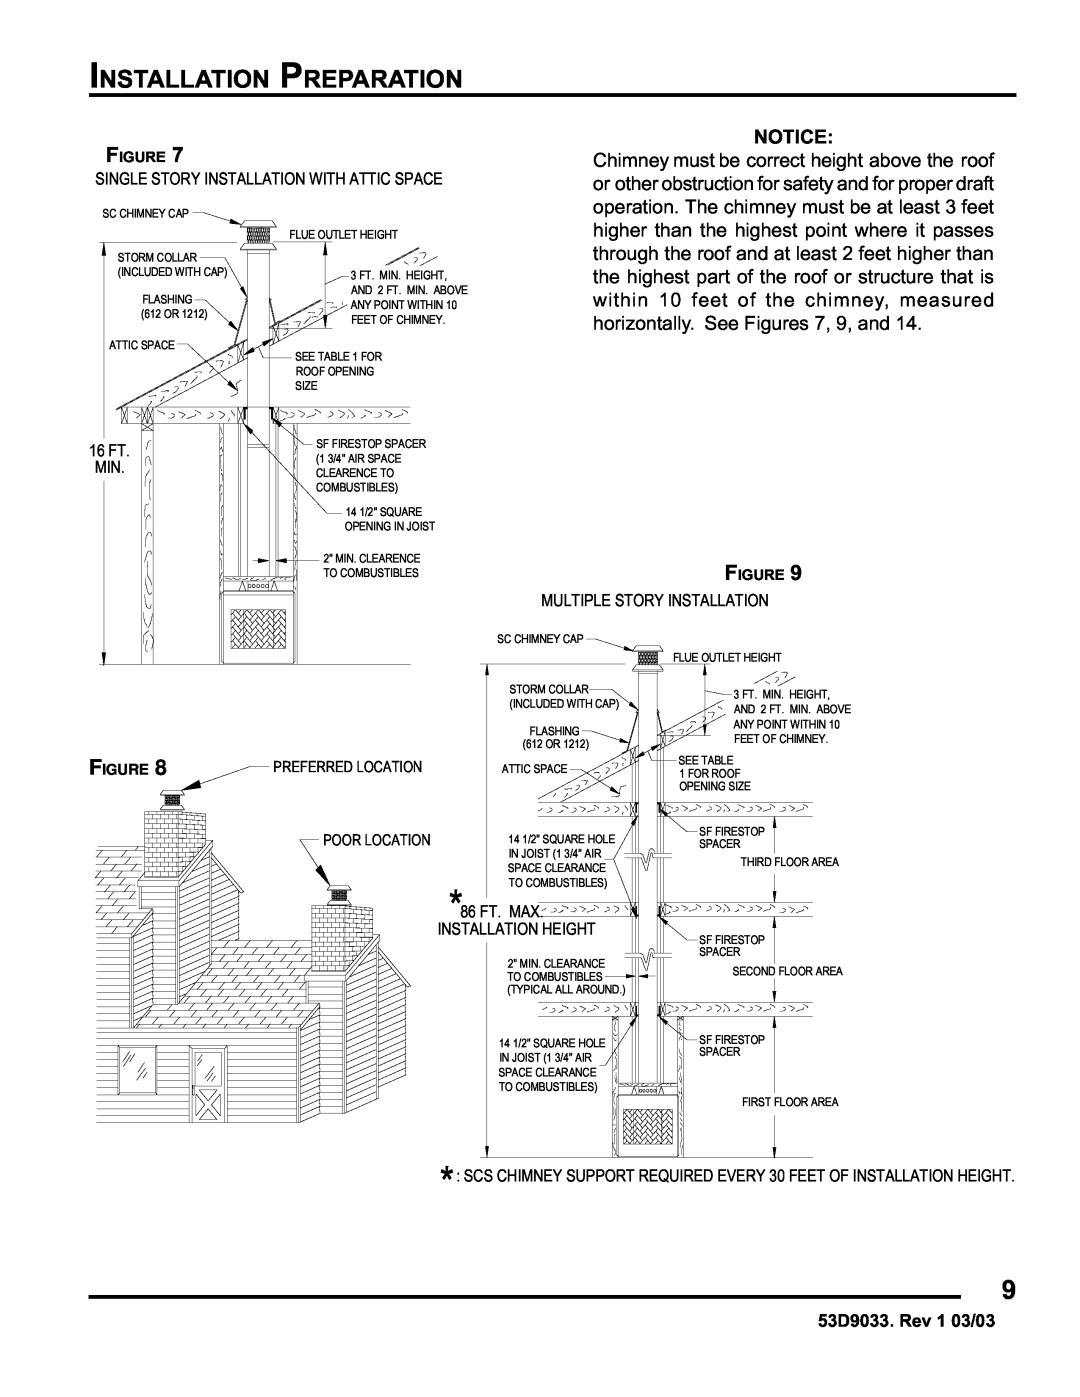 Monessen Hearth SWB400I instruction manual Installation Preparation, Single Story Installation With Attic Space, 16FT MIN 